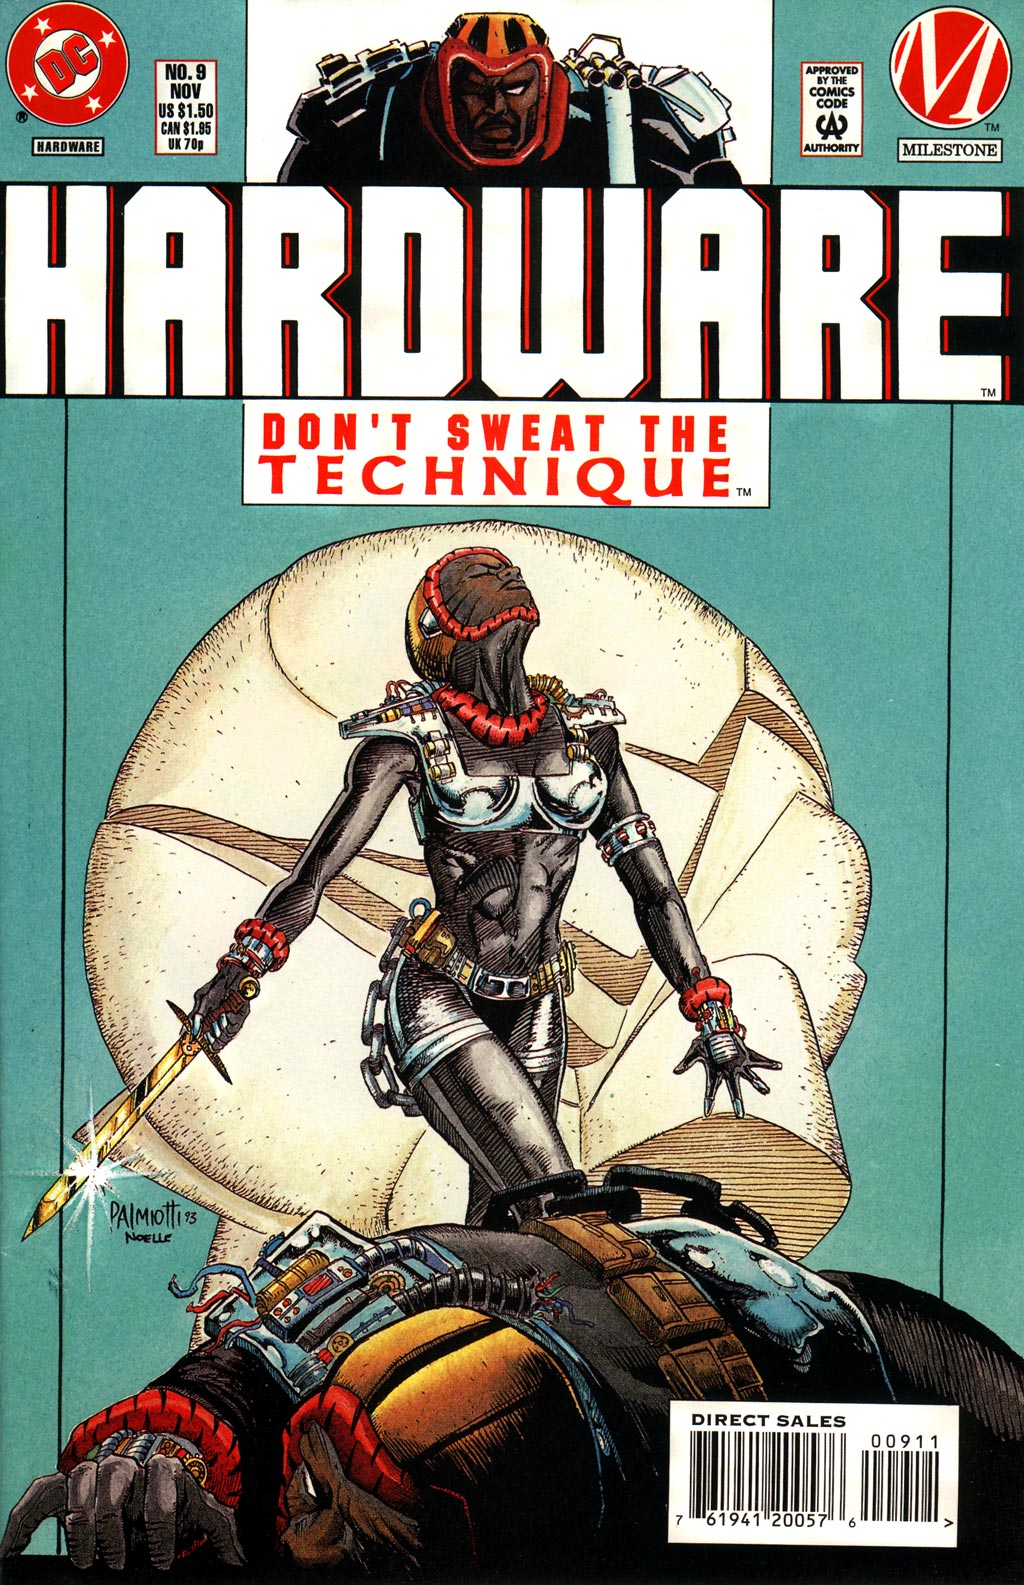 Read online Hardware comic -  Issue #9 - 1